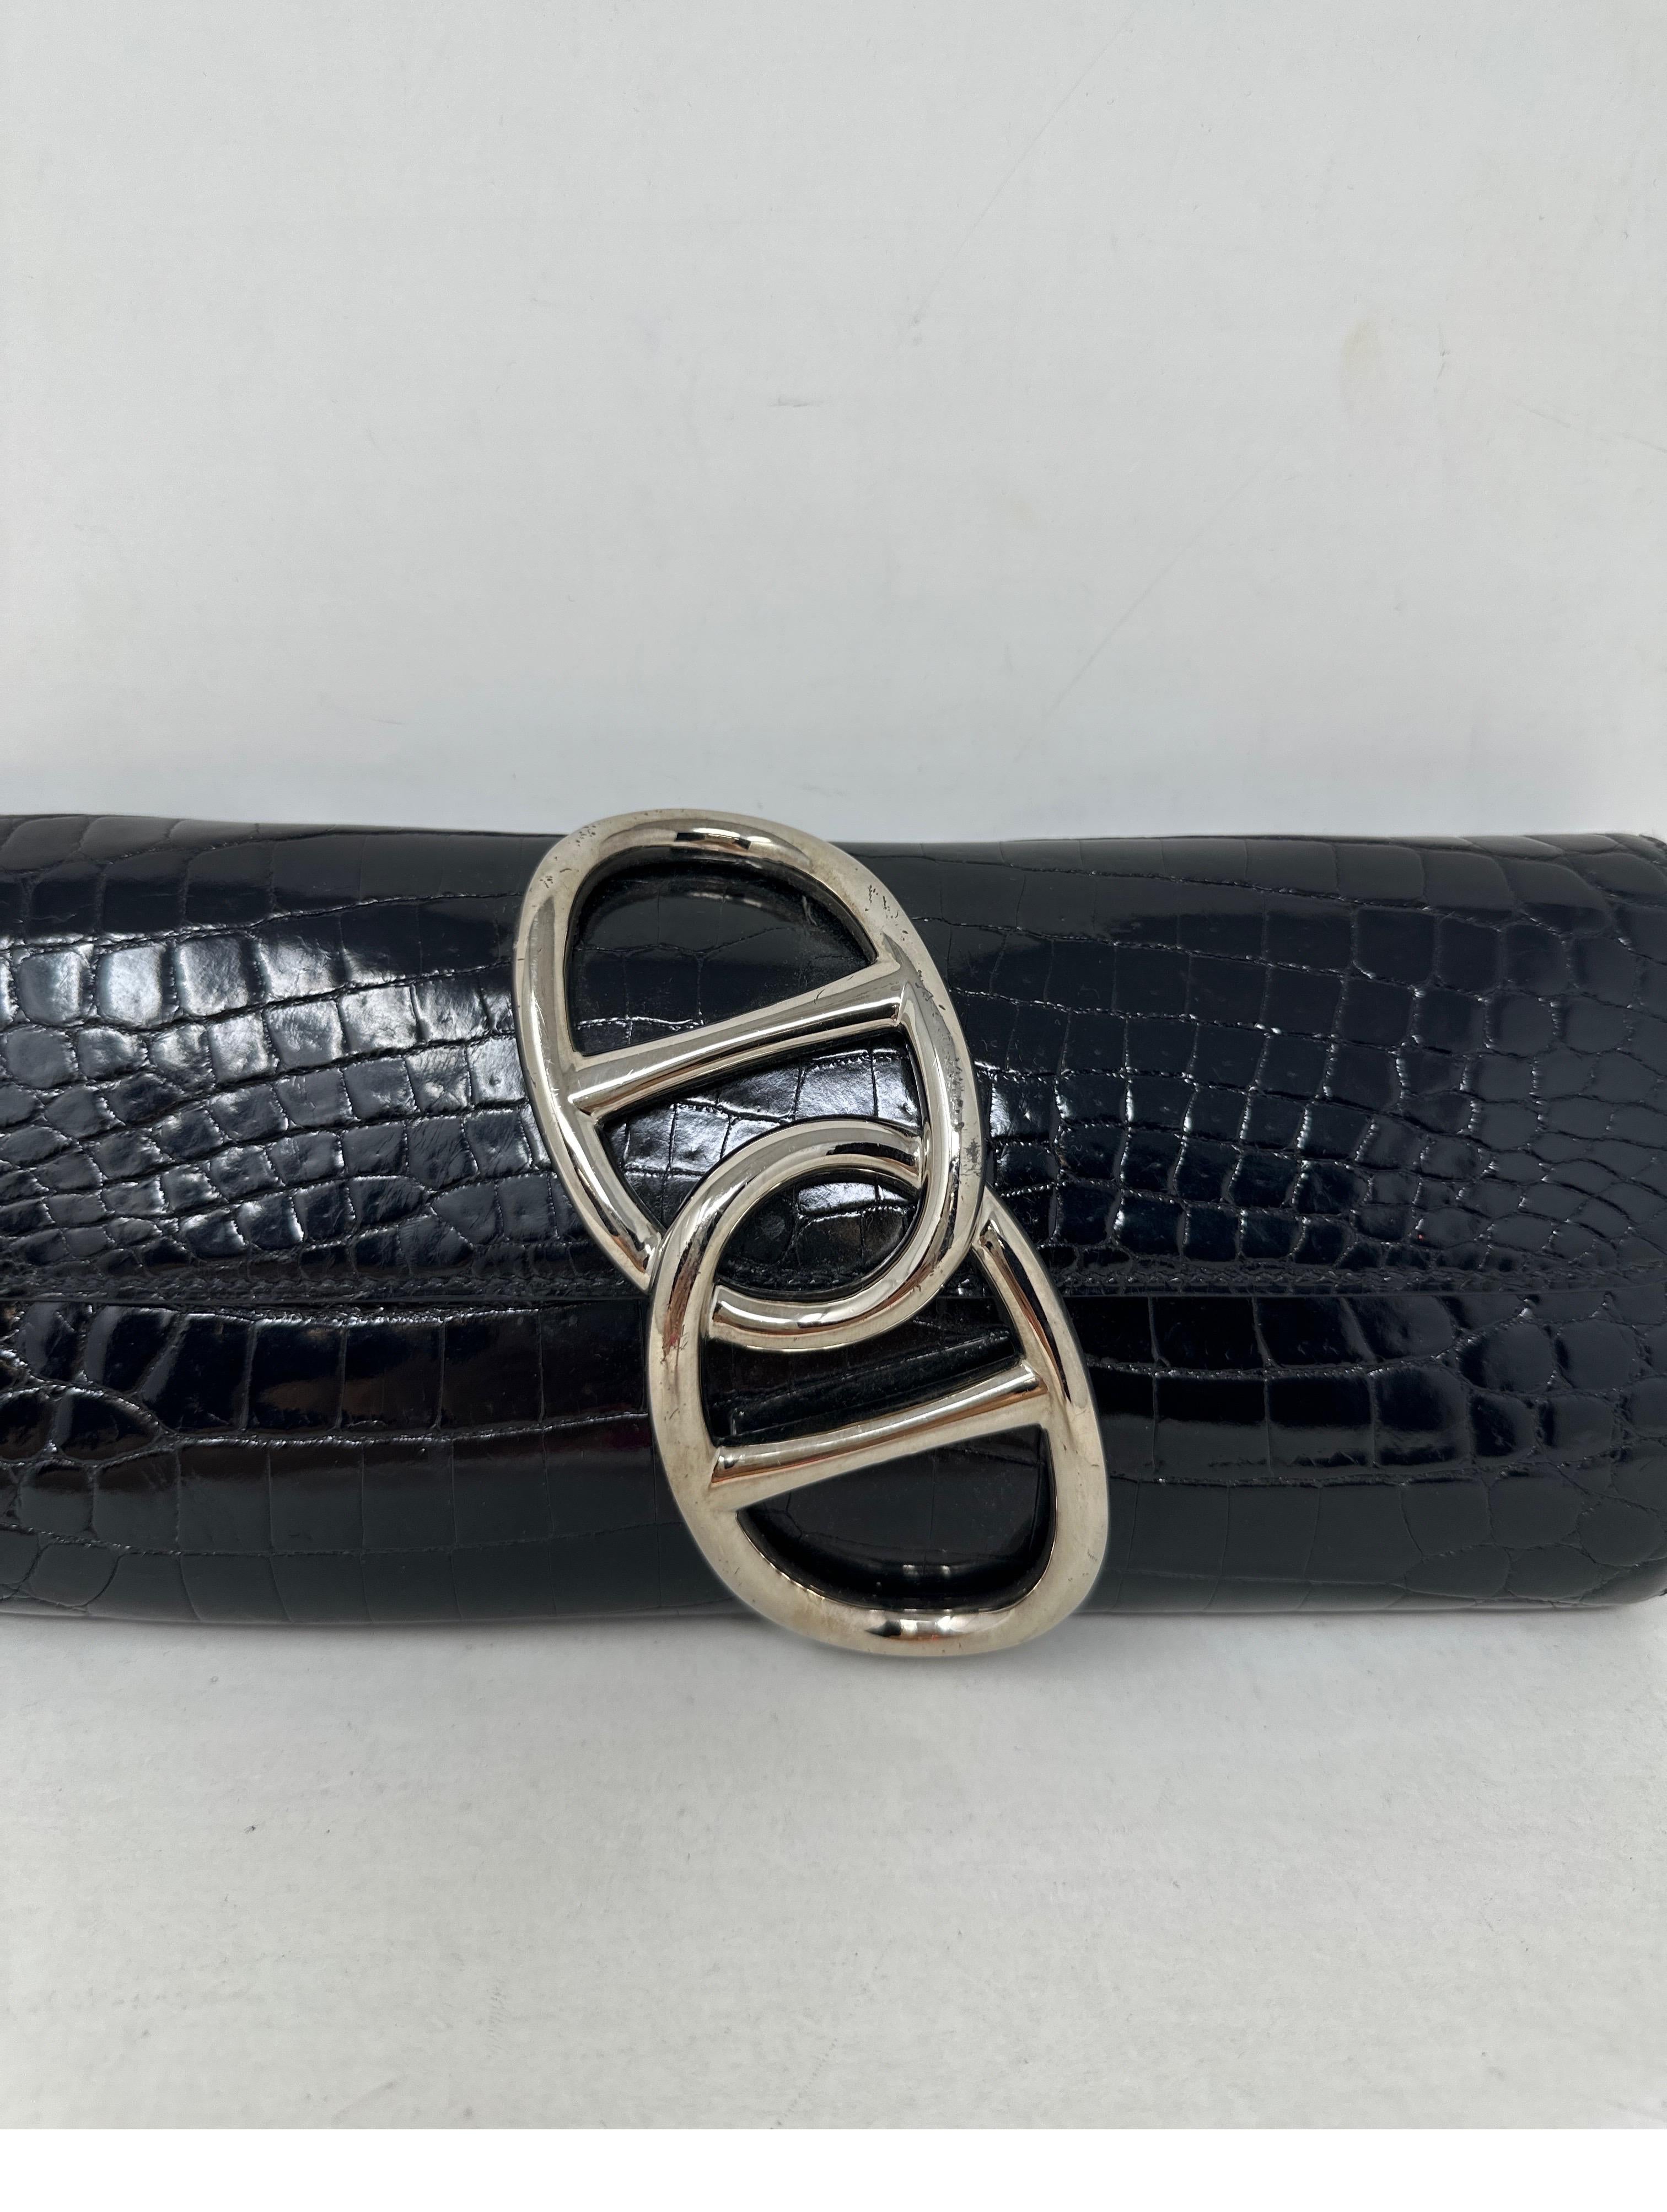 Hermes Black Niloticus Shiny Crocodile Egee Clutch. Rare clutch with silver chaine d'ancre links closure. Excellent condition. Interior clean. Great evening bag and accessory. Includes dust bag. Guaranteed authentic. Add this to your Hermes